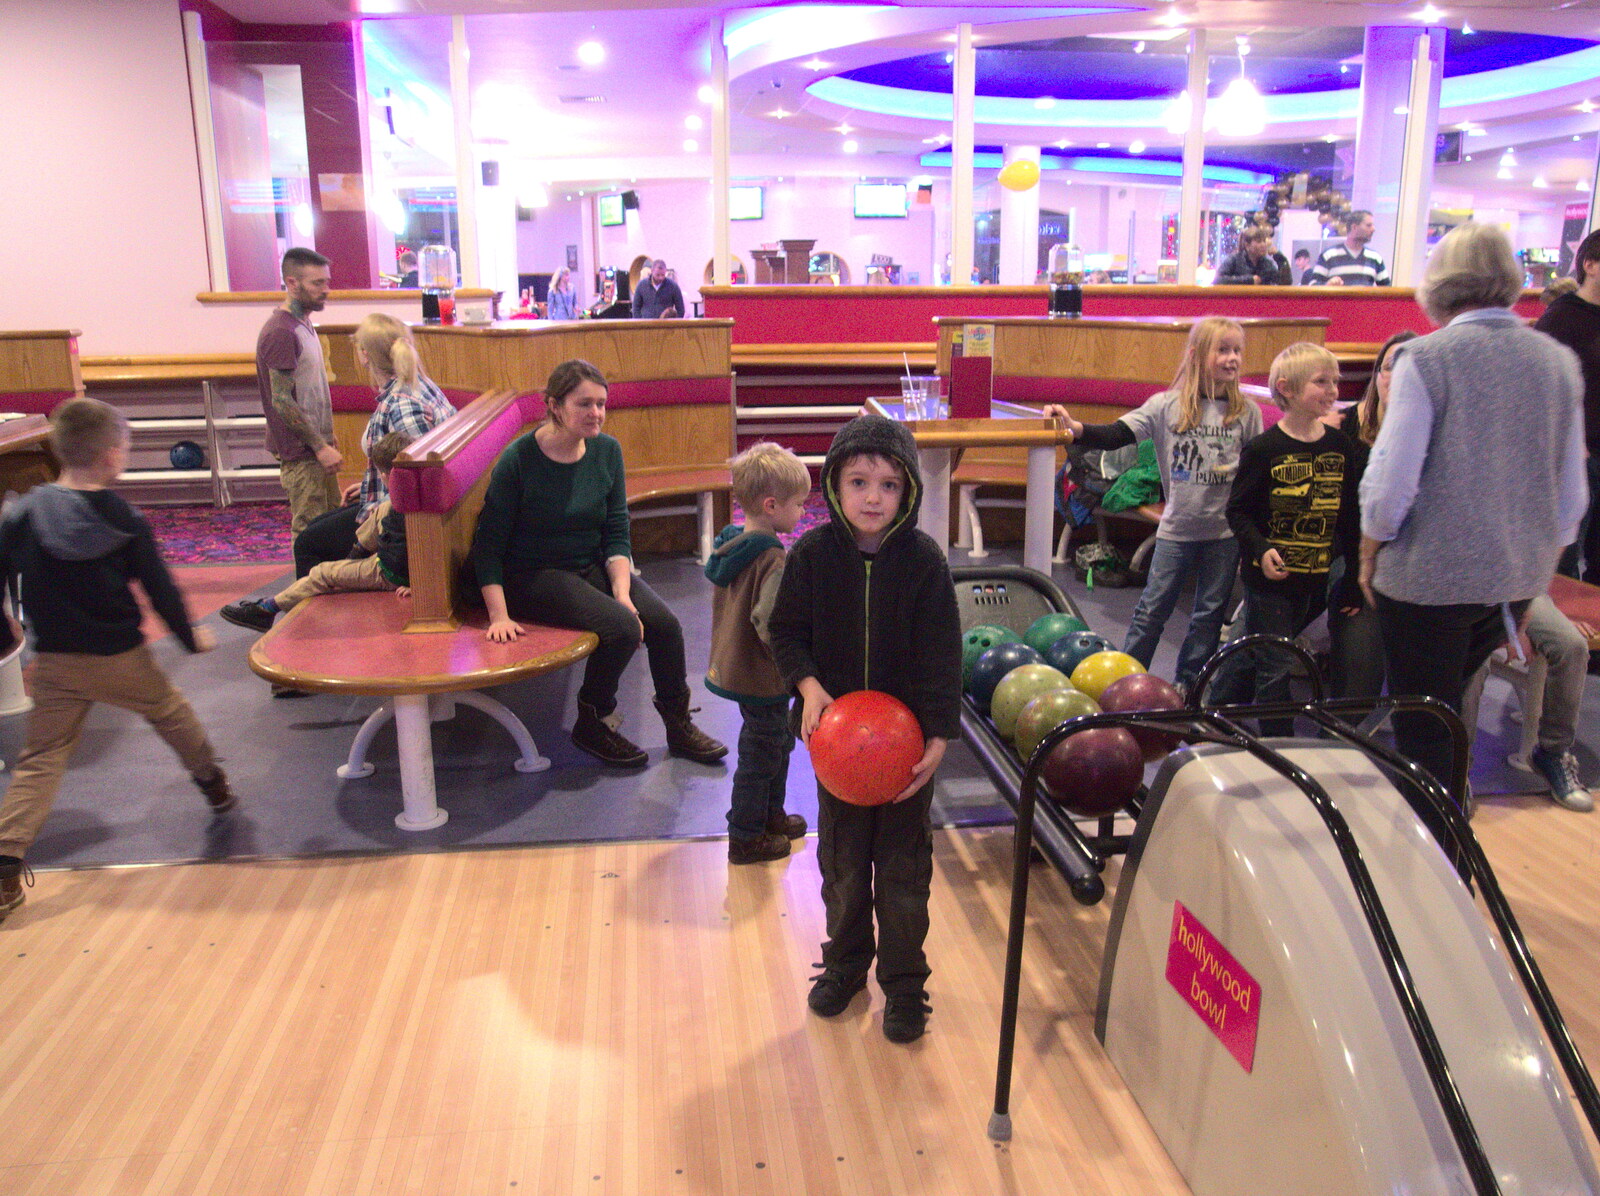 Fred gets ready to bowl from Ten-Pin Bowling, Riverside, Norwich - 3rd January 2016